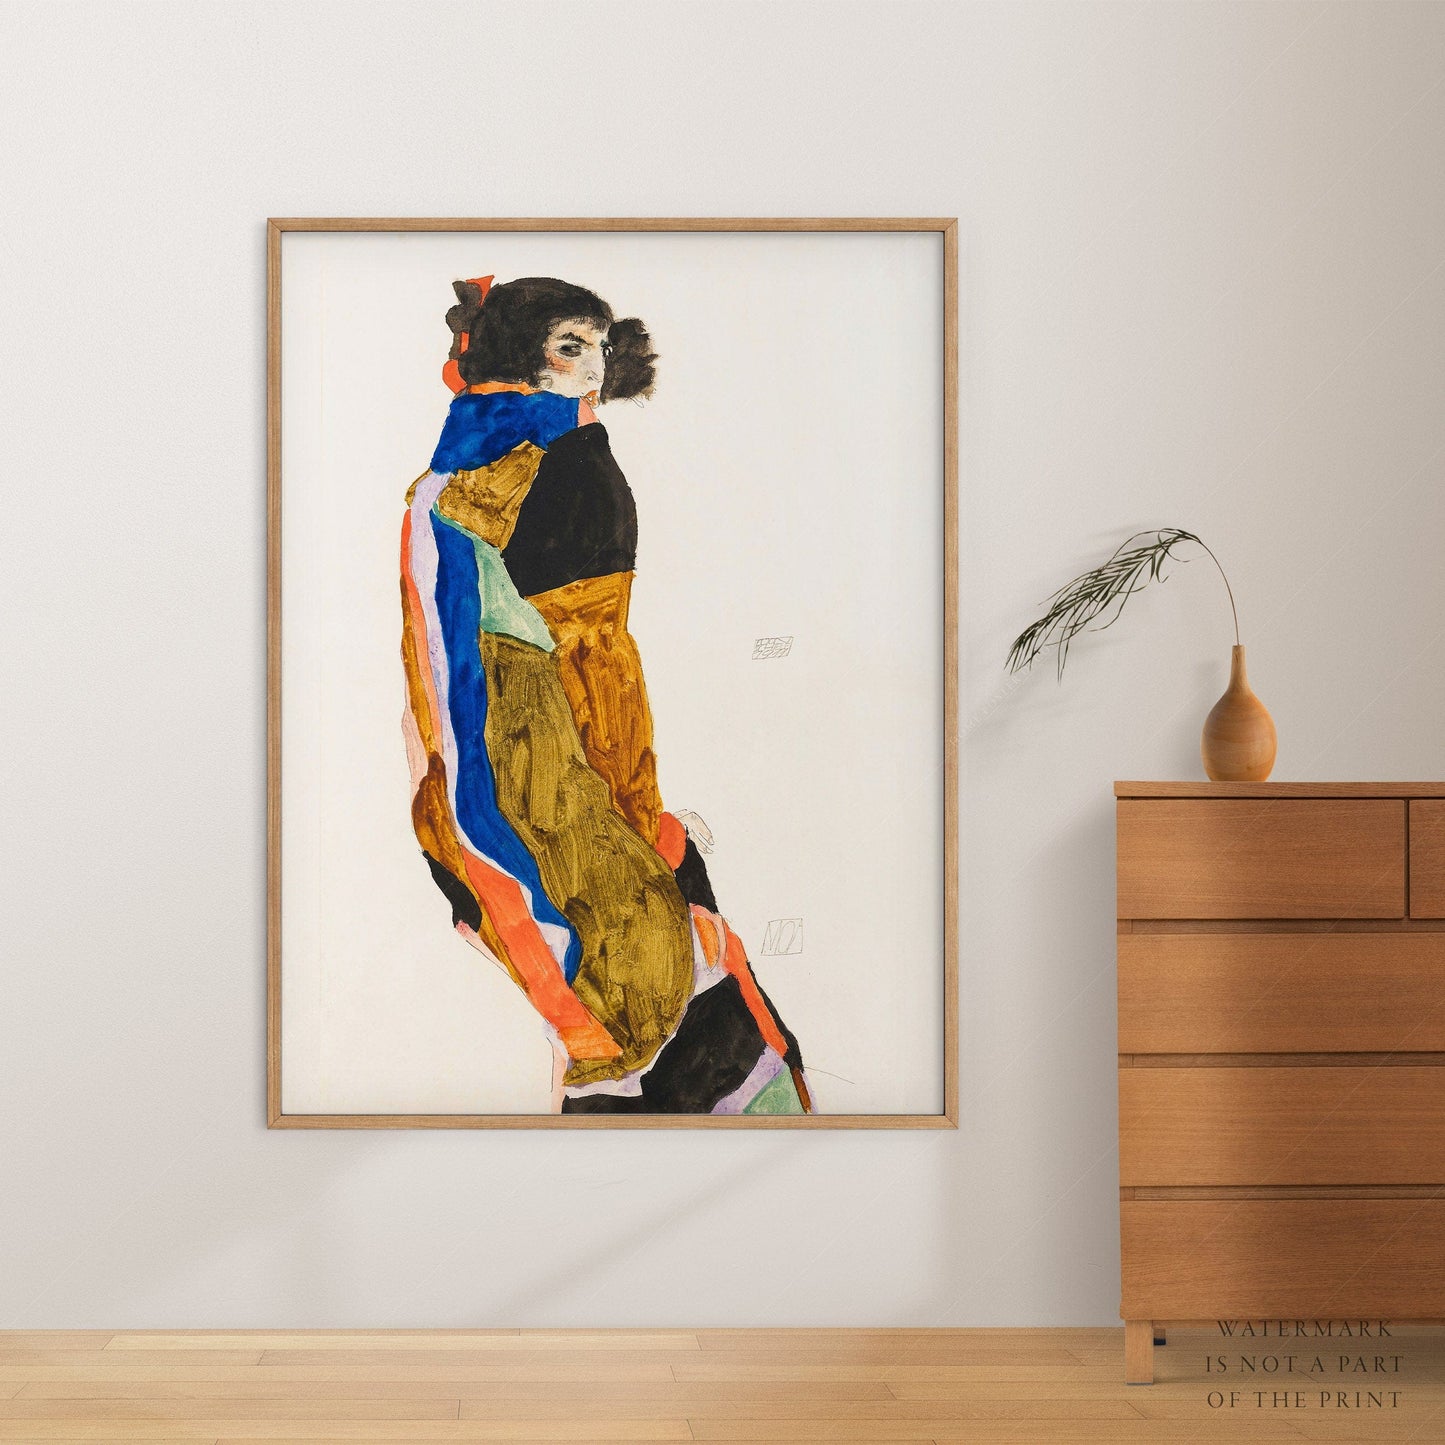 Home Poster Decor Single Egon Schiele Poster, Moa Print, The MET museum, Women Standing, Line Drawing, Expressionist painter, 20th century,  Twisted bodies